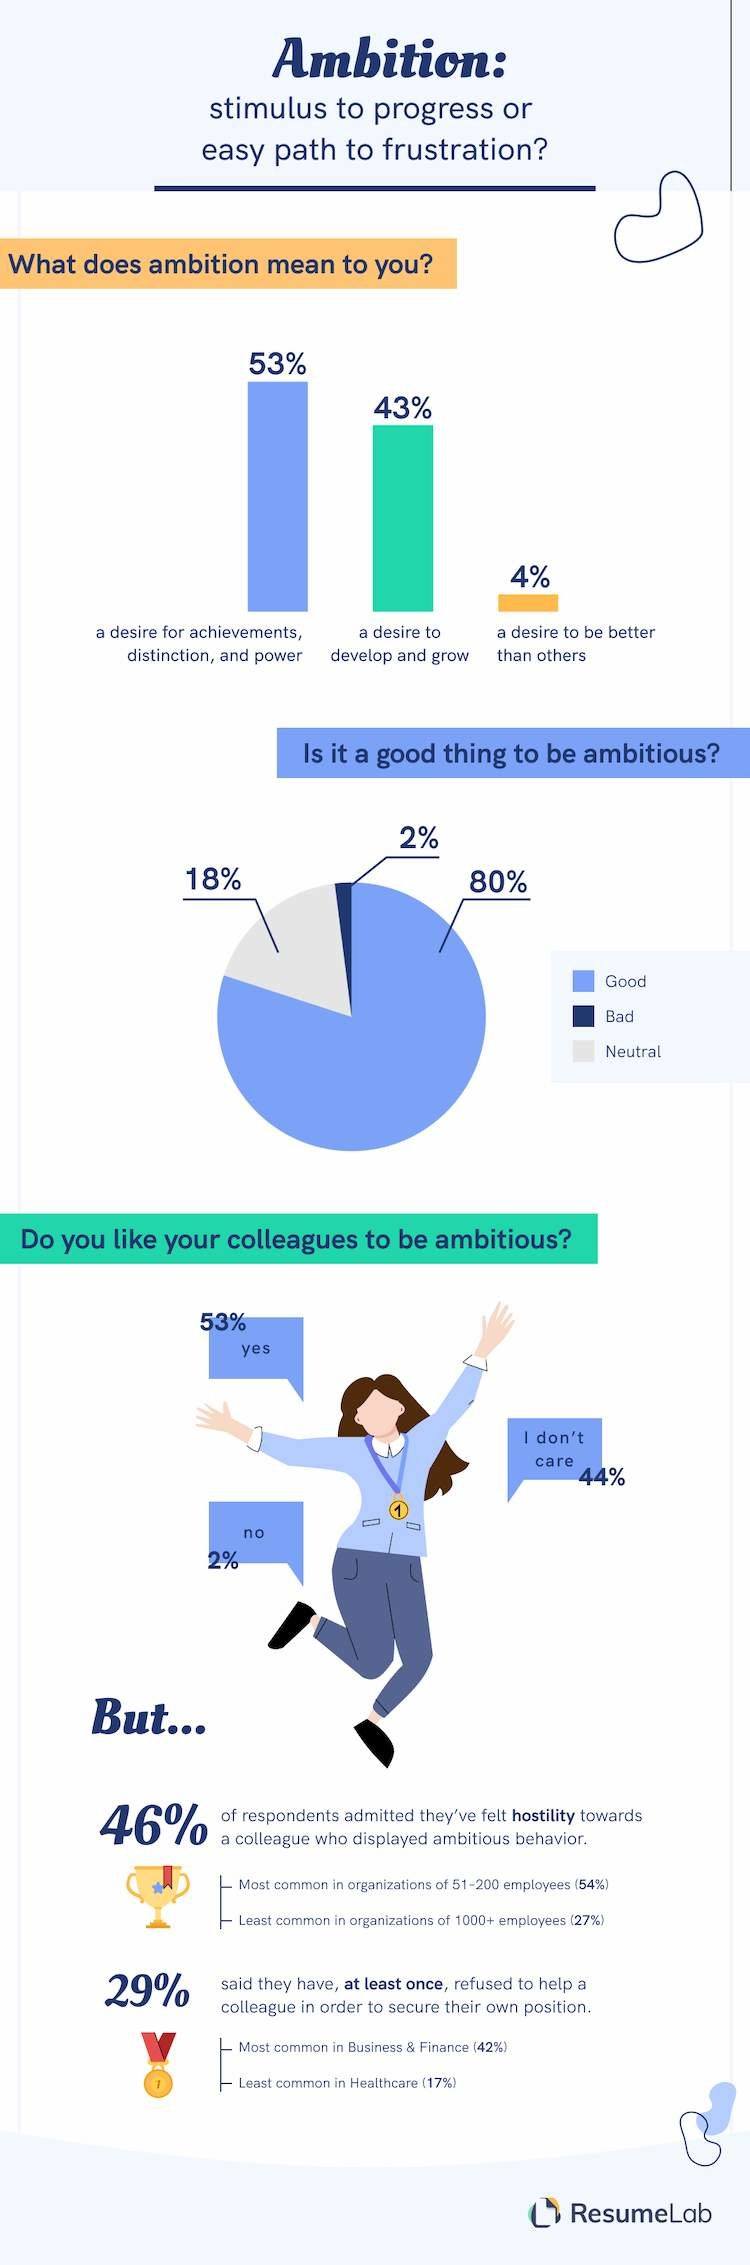 ResumeLab infographic about attitudes towards ambition in the workplace.